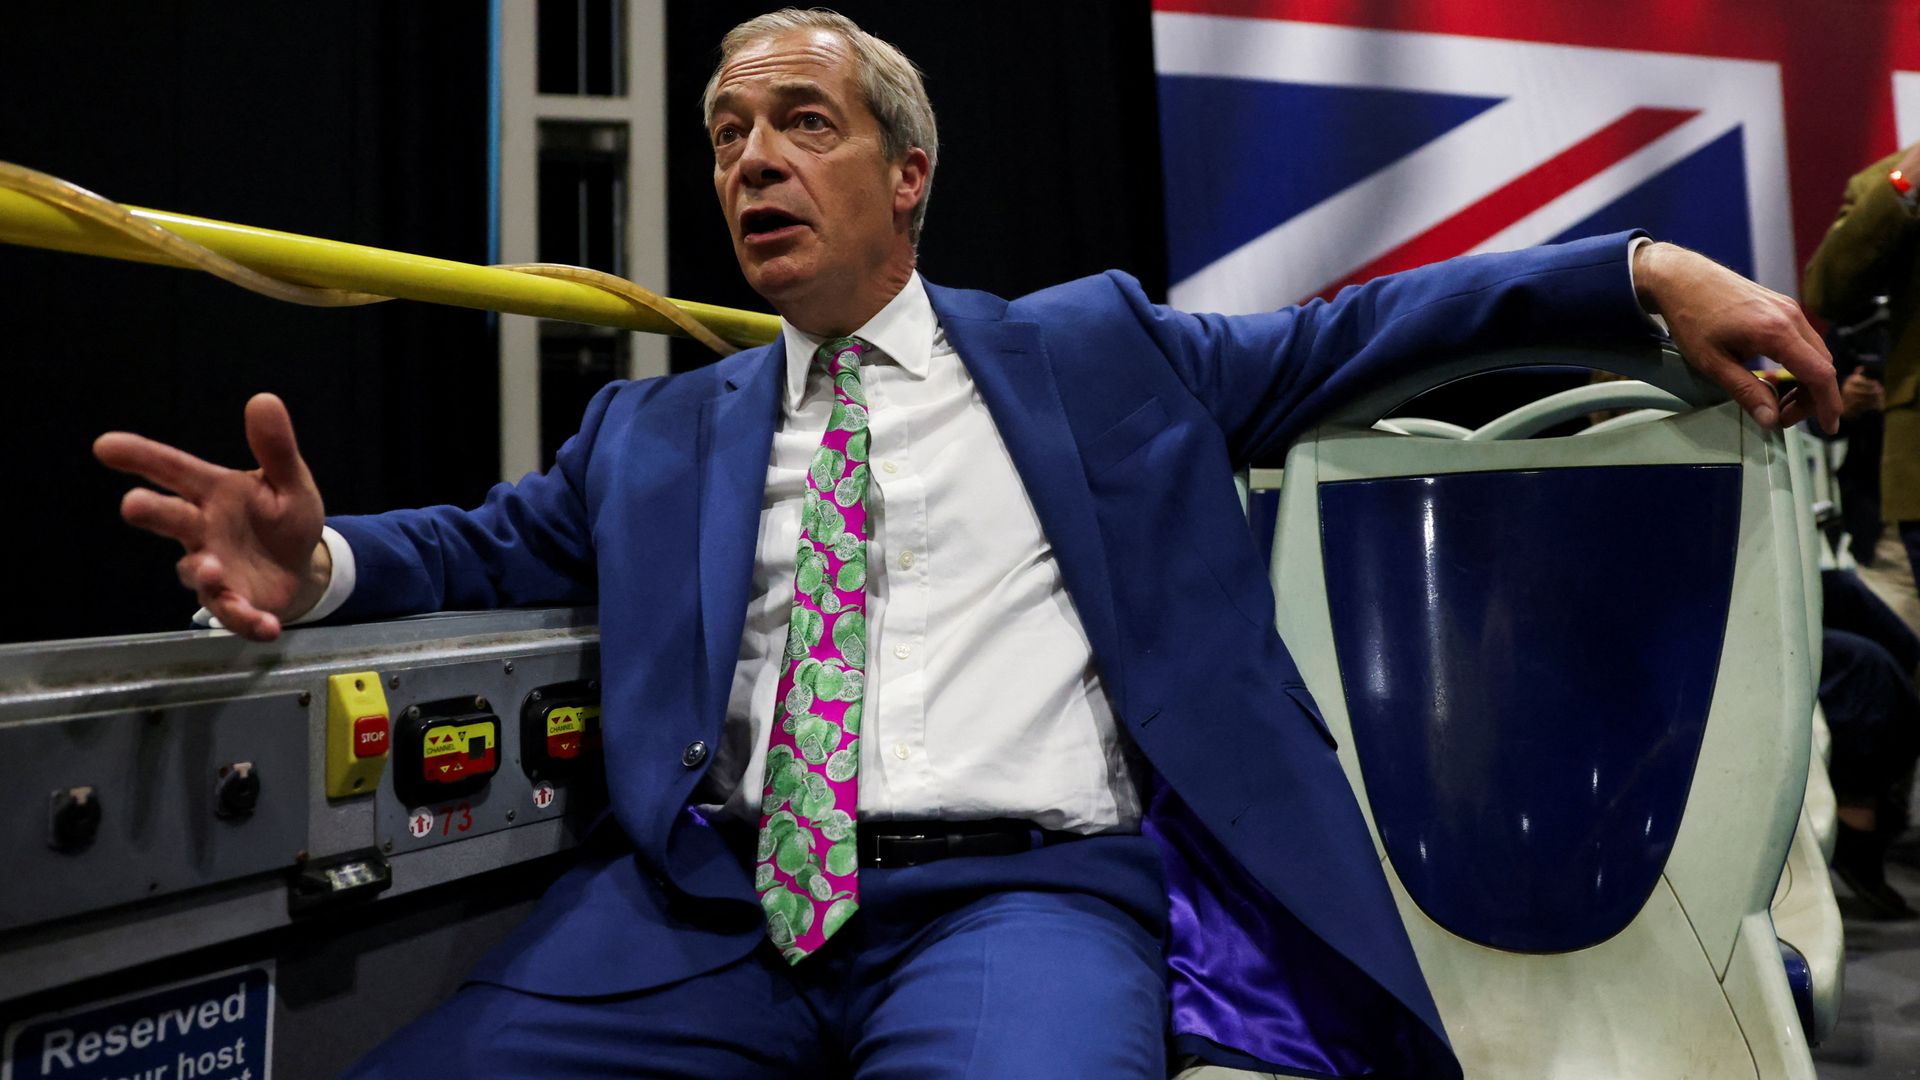 'I want nothing to do with them': Farage rules out joining Tory party 